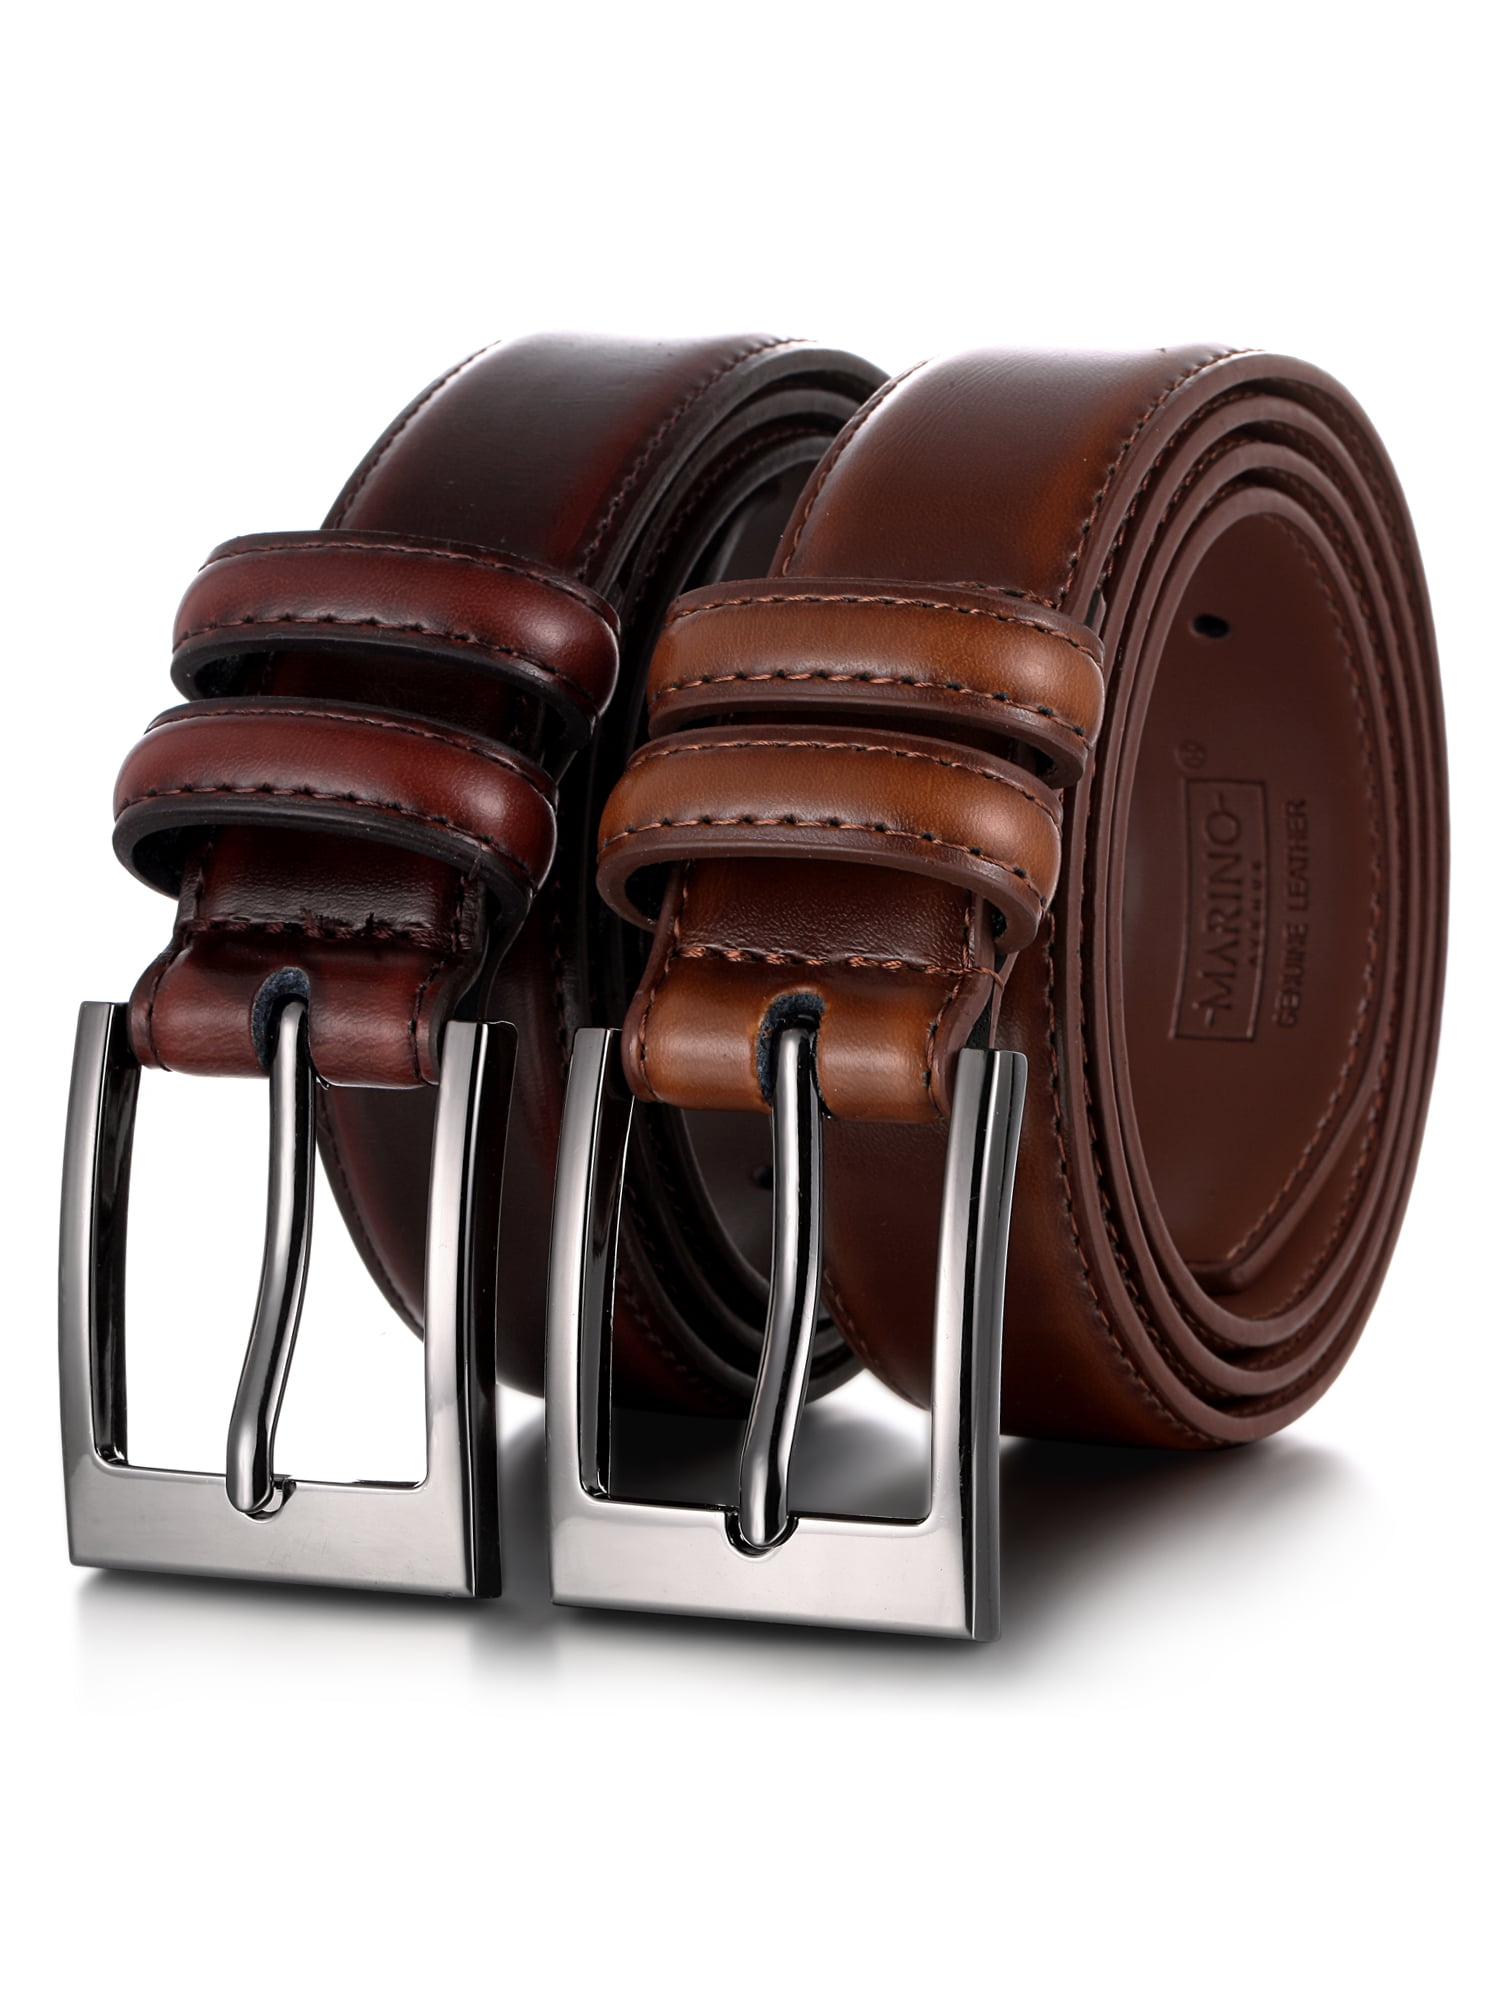 Genuine Leather Dress Belts For Men - Mens Belt For Suits, Jeans, Uniform  With Single Prong Buckle - Designed in the USA at  Men's Clothing  store